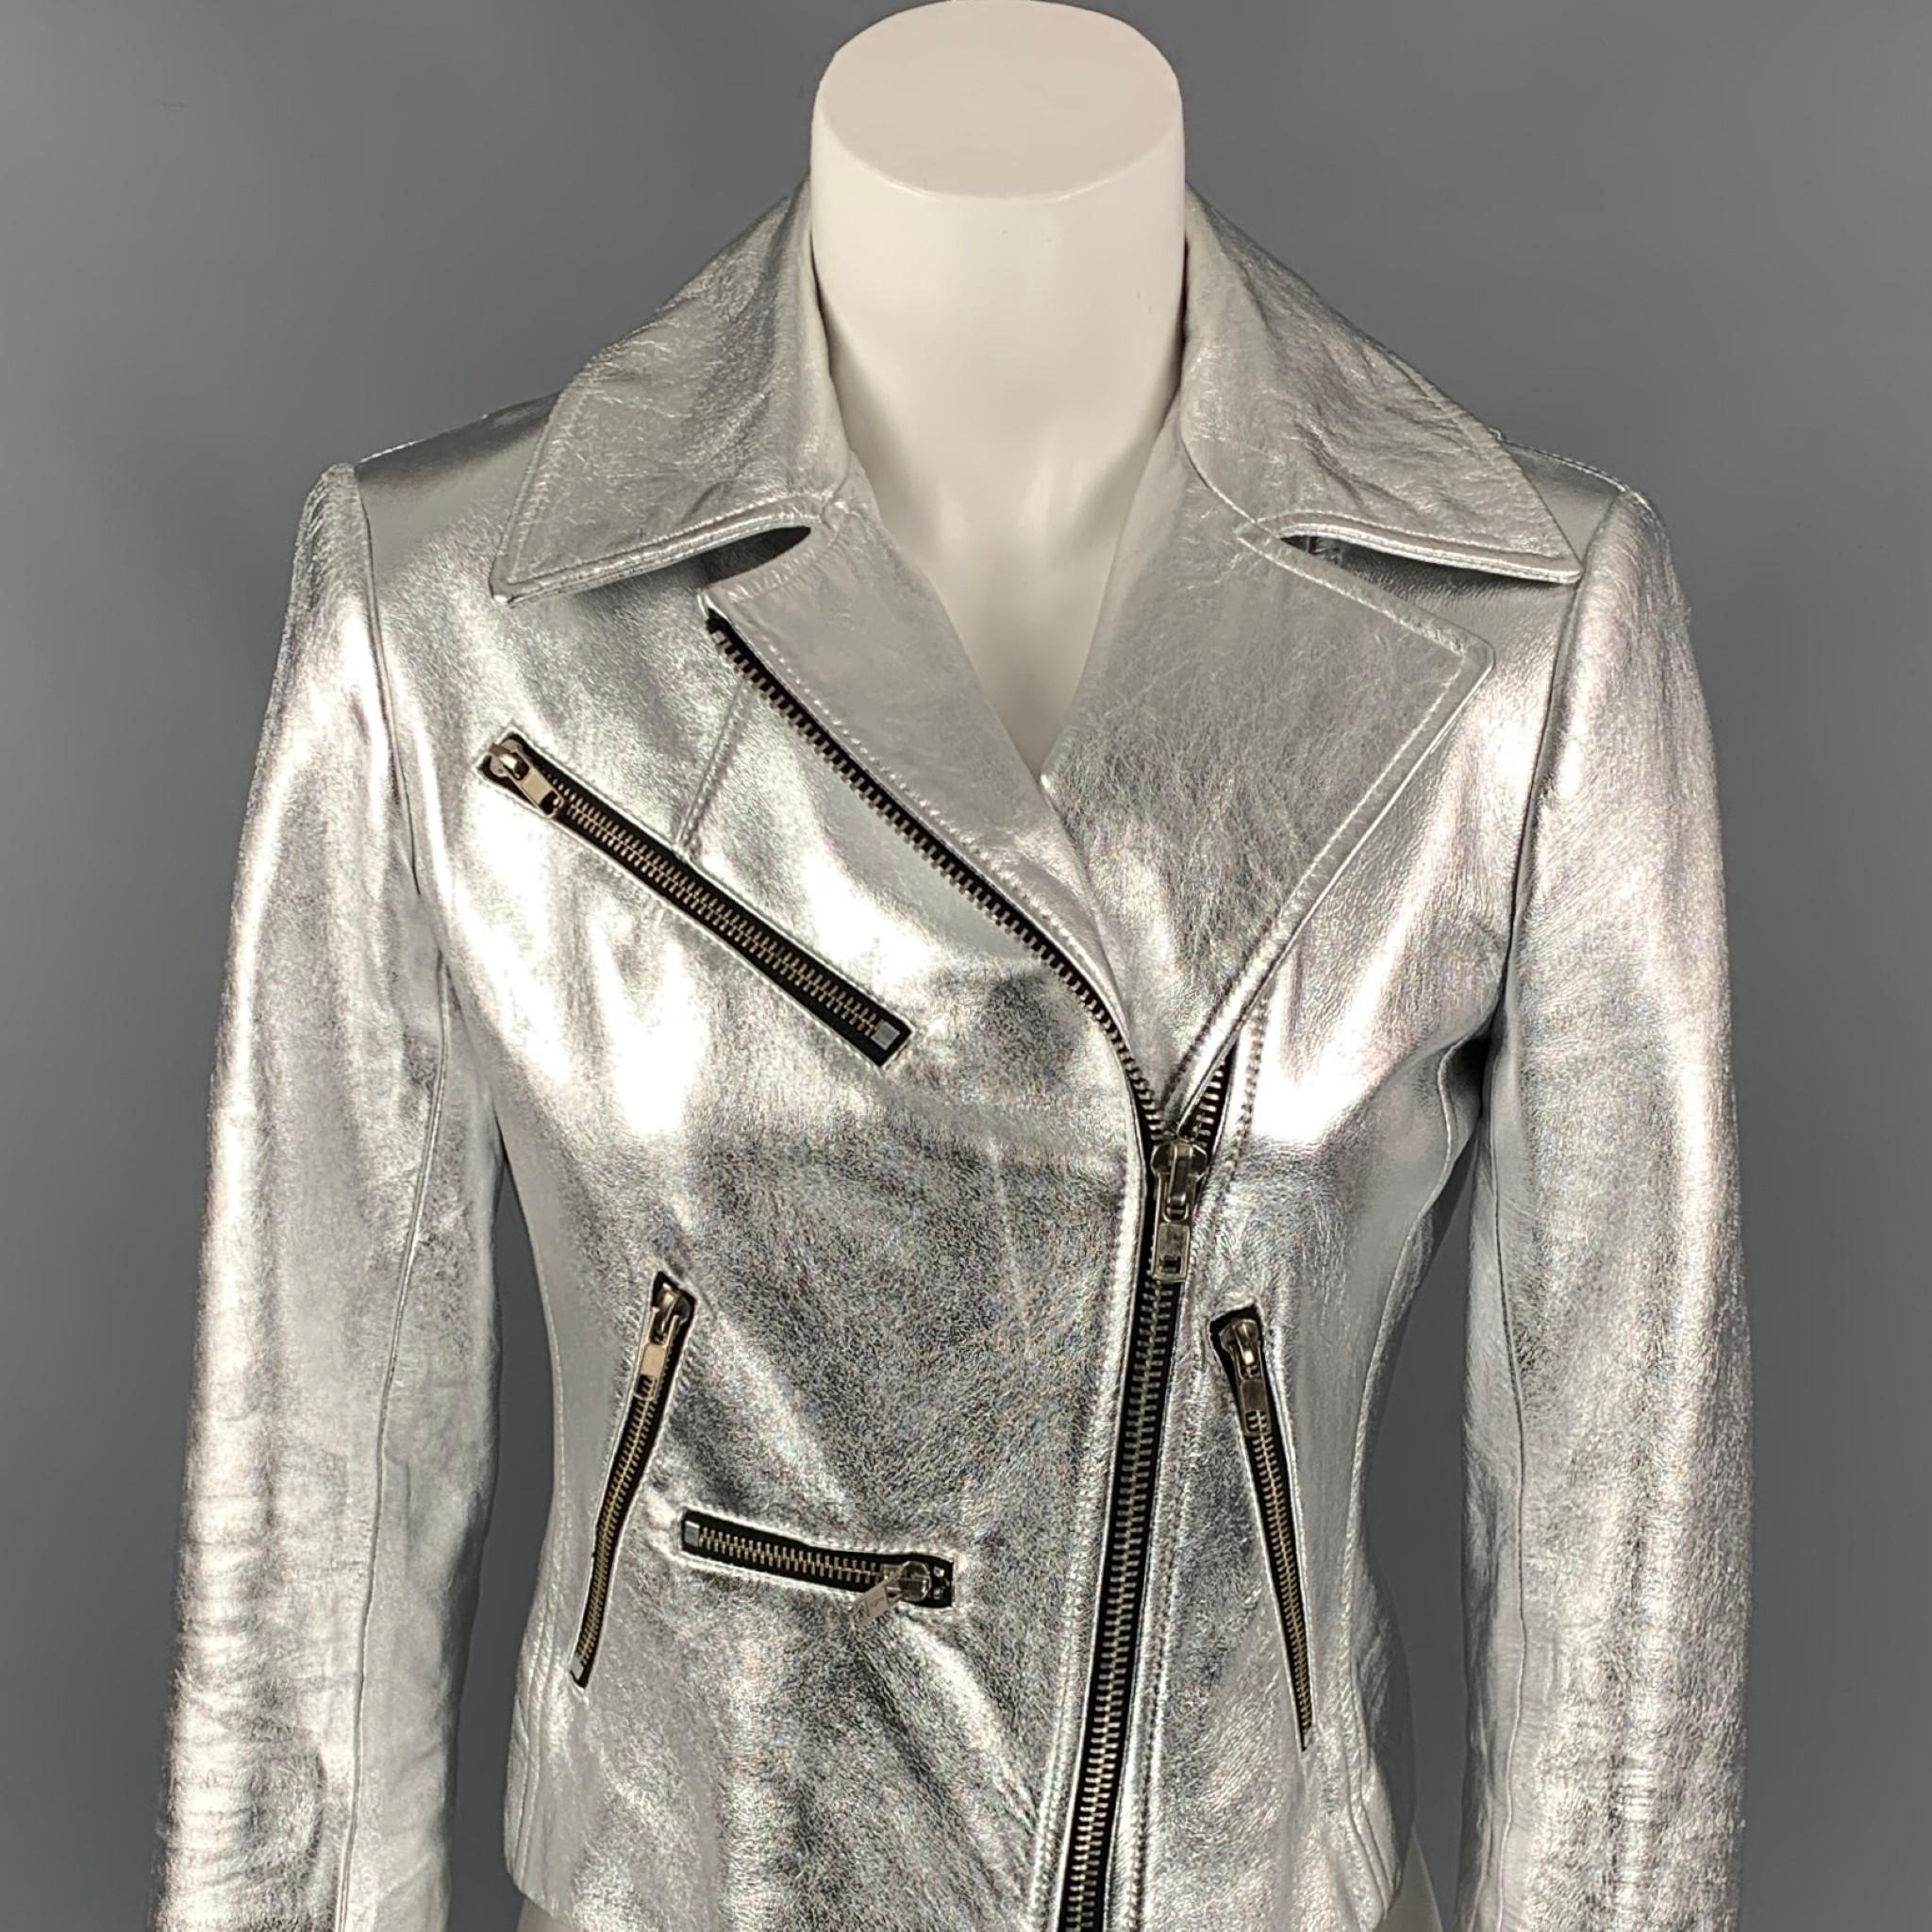 A.L.C jacket comes in a silver metallic leather with a full liner featuring a biker style, zipper pockets, zipper sleeve details, and a full zip up closure. 

Very Good Pre-Owned Condition.
Marked: 2

Measurements:

Shoulder: 15.5 in.
Bust: 35